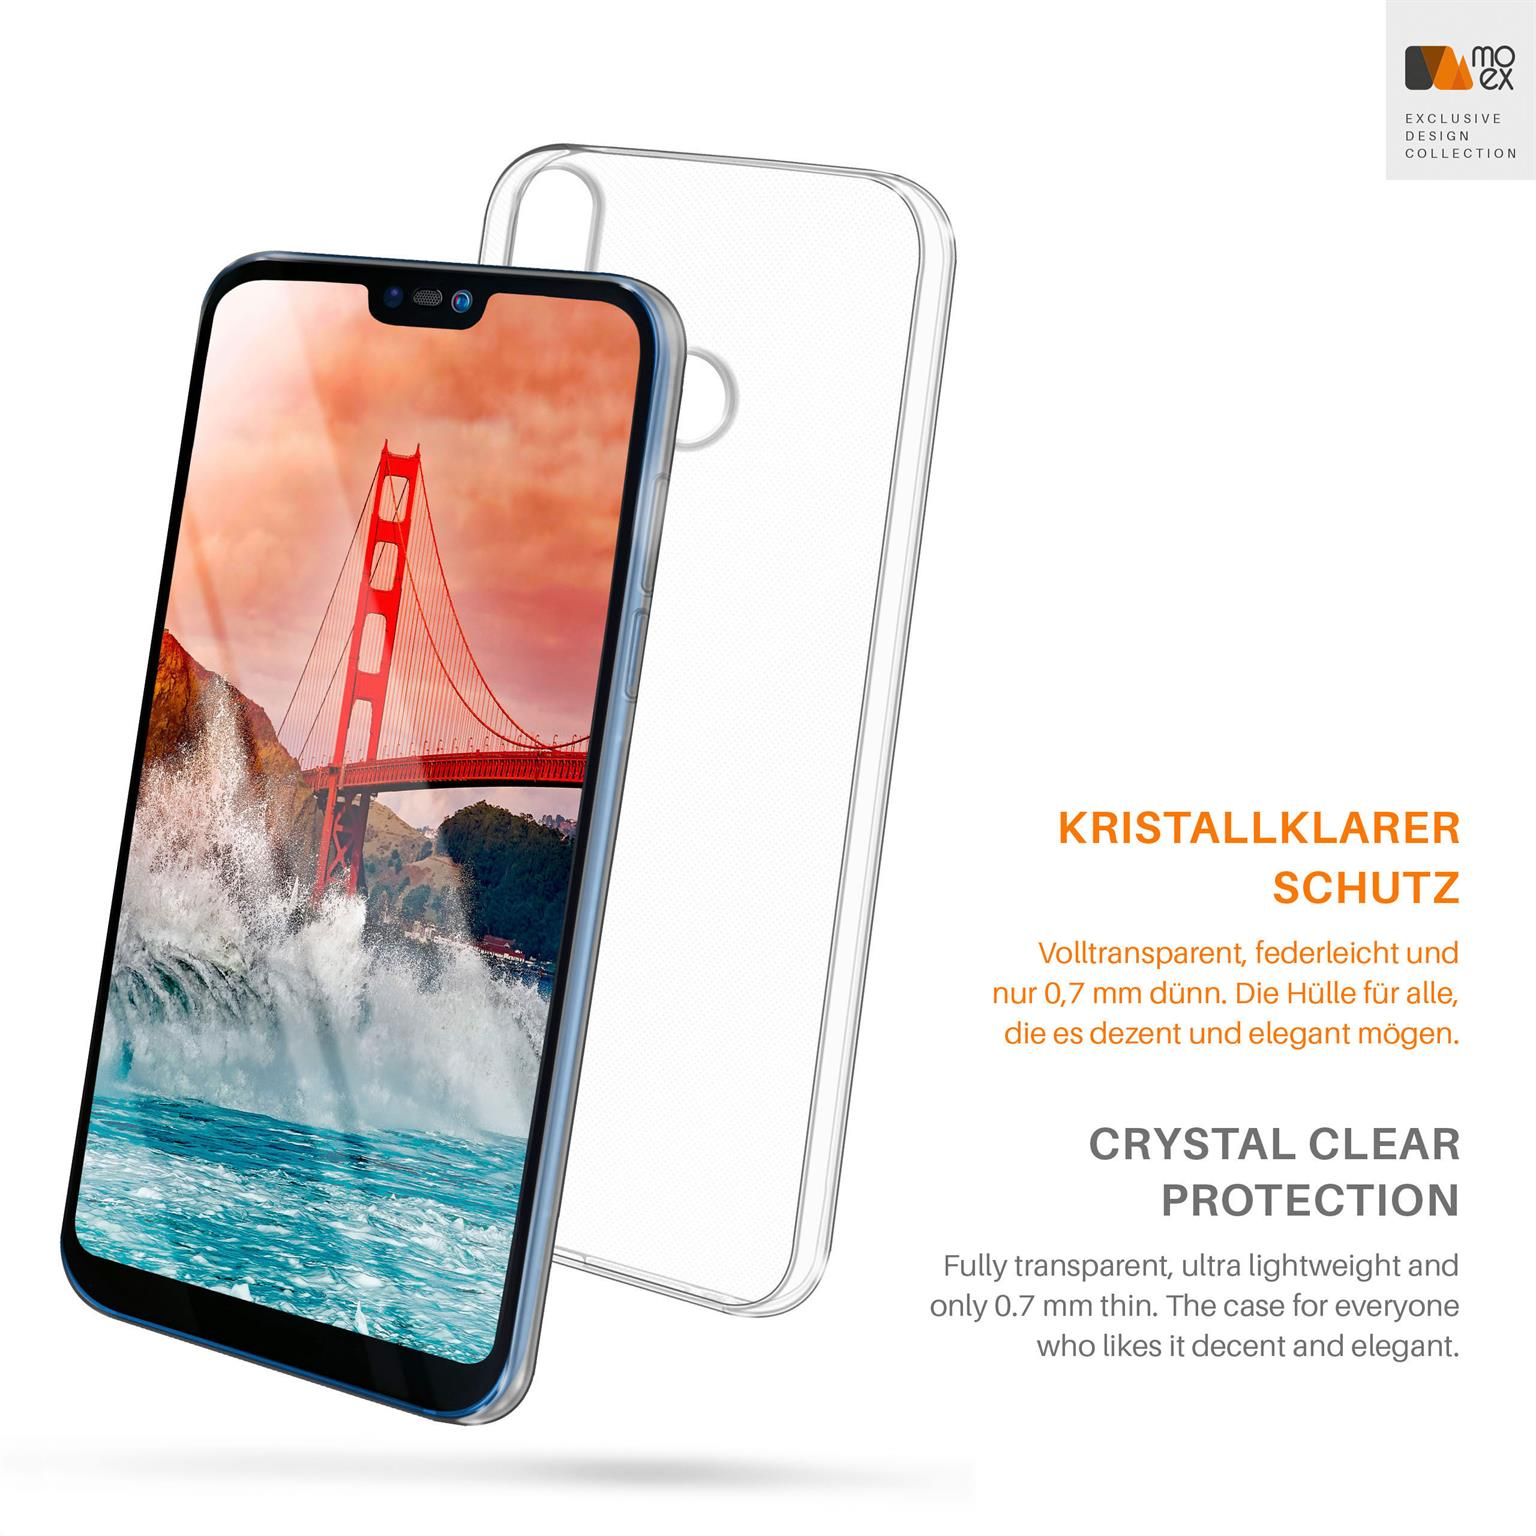 MOEX Crystal-Clear Aero Honor Case, 8X, Backcover, Huawei,